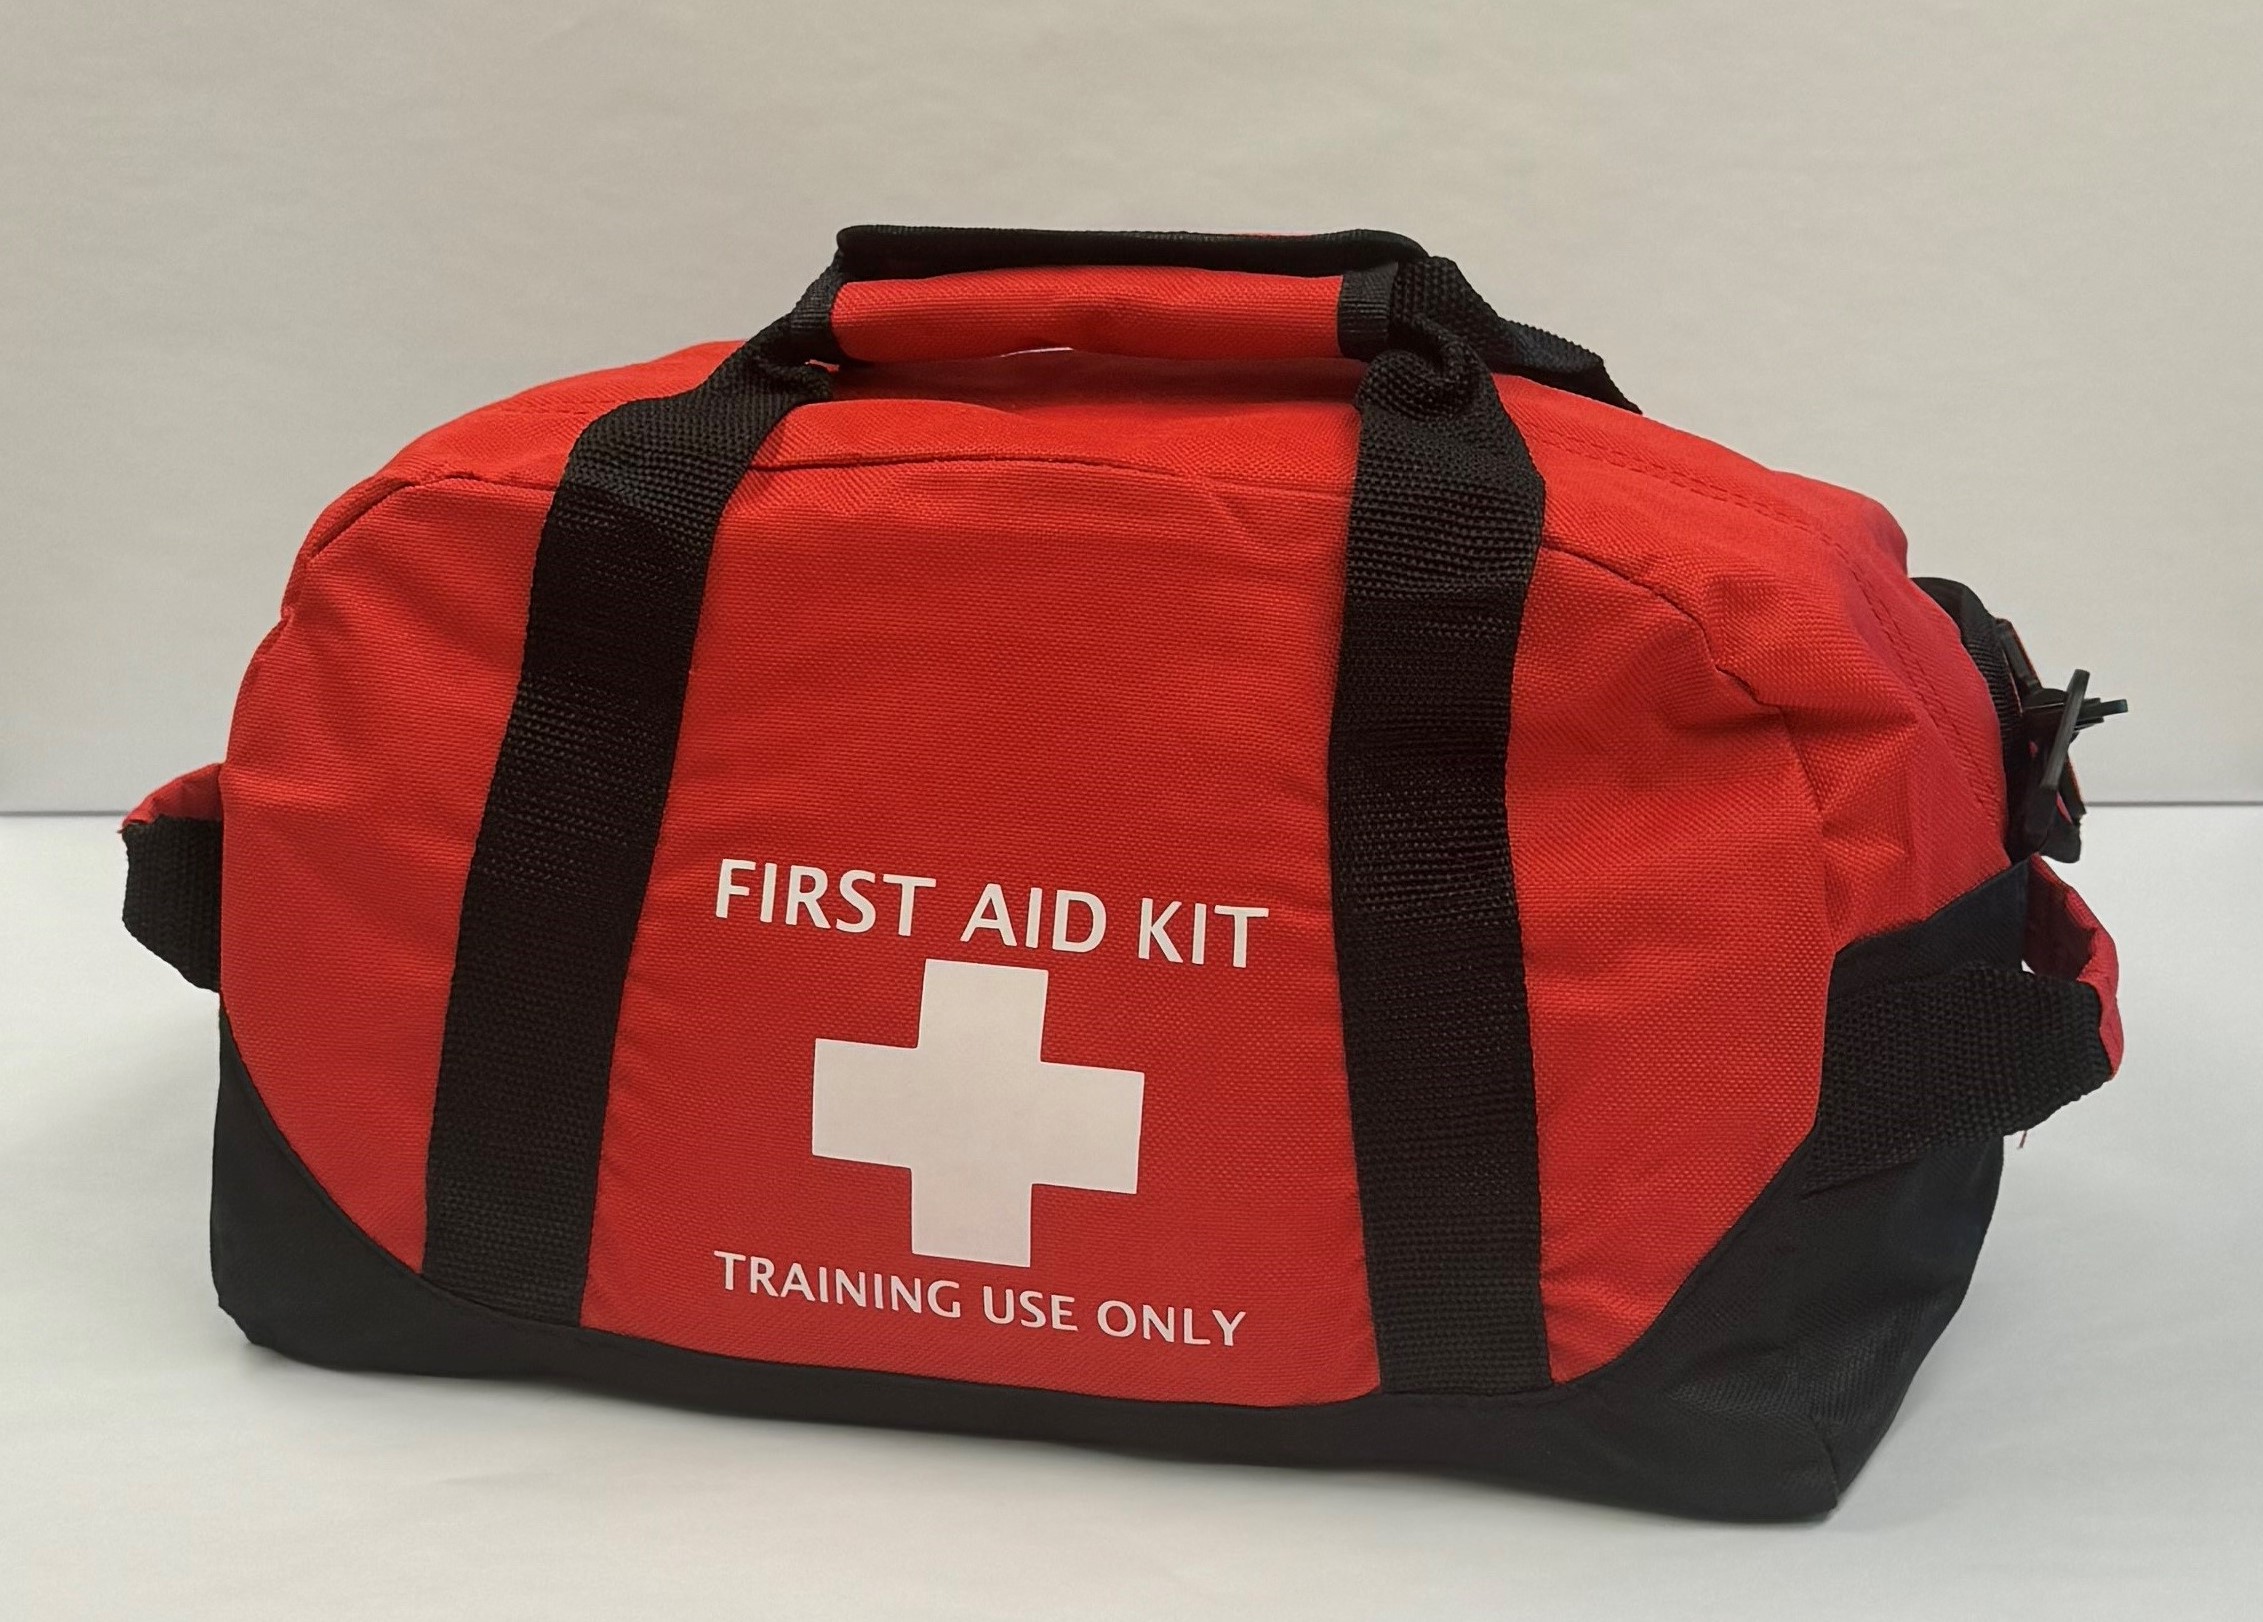 First Aid Kit Bag - Training Use Only